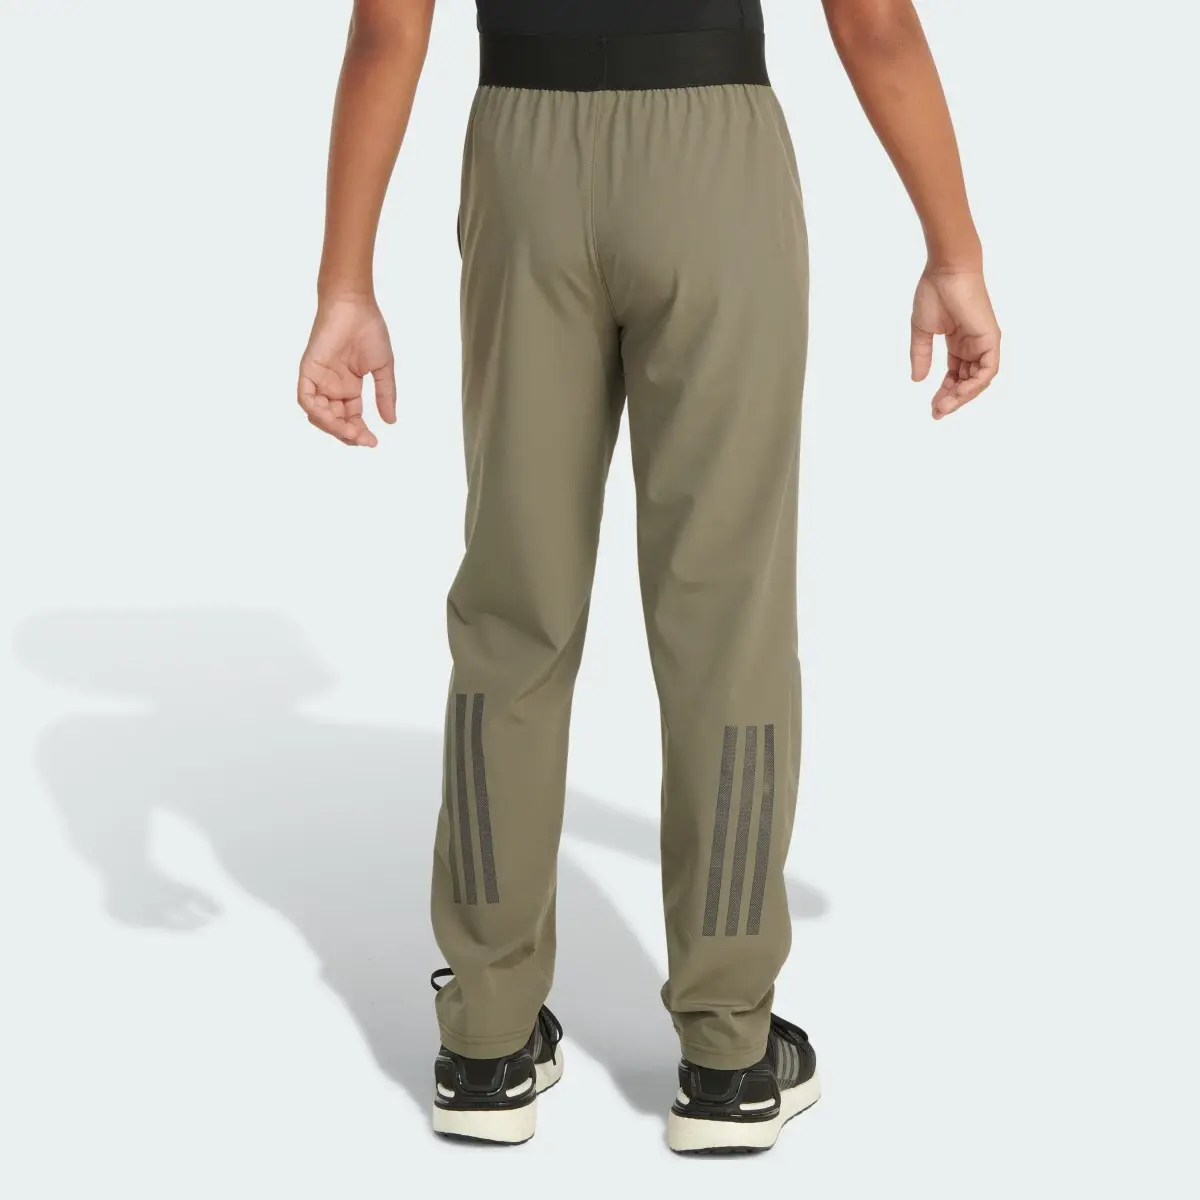 Adidas Designed for Training Stretch Woven Pants. 2